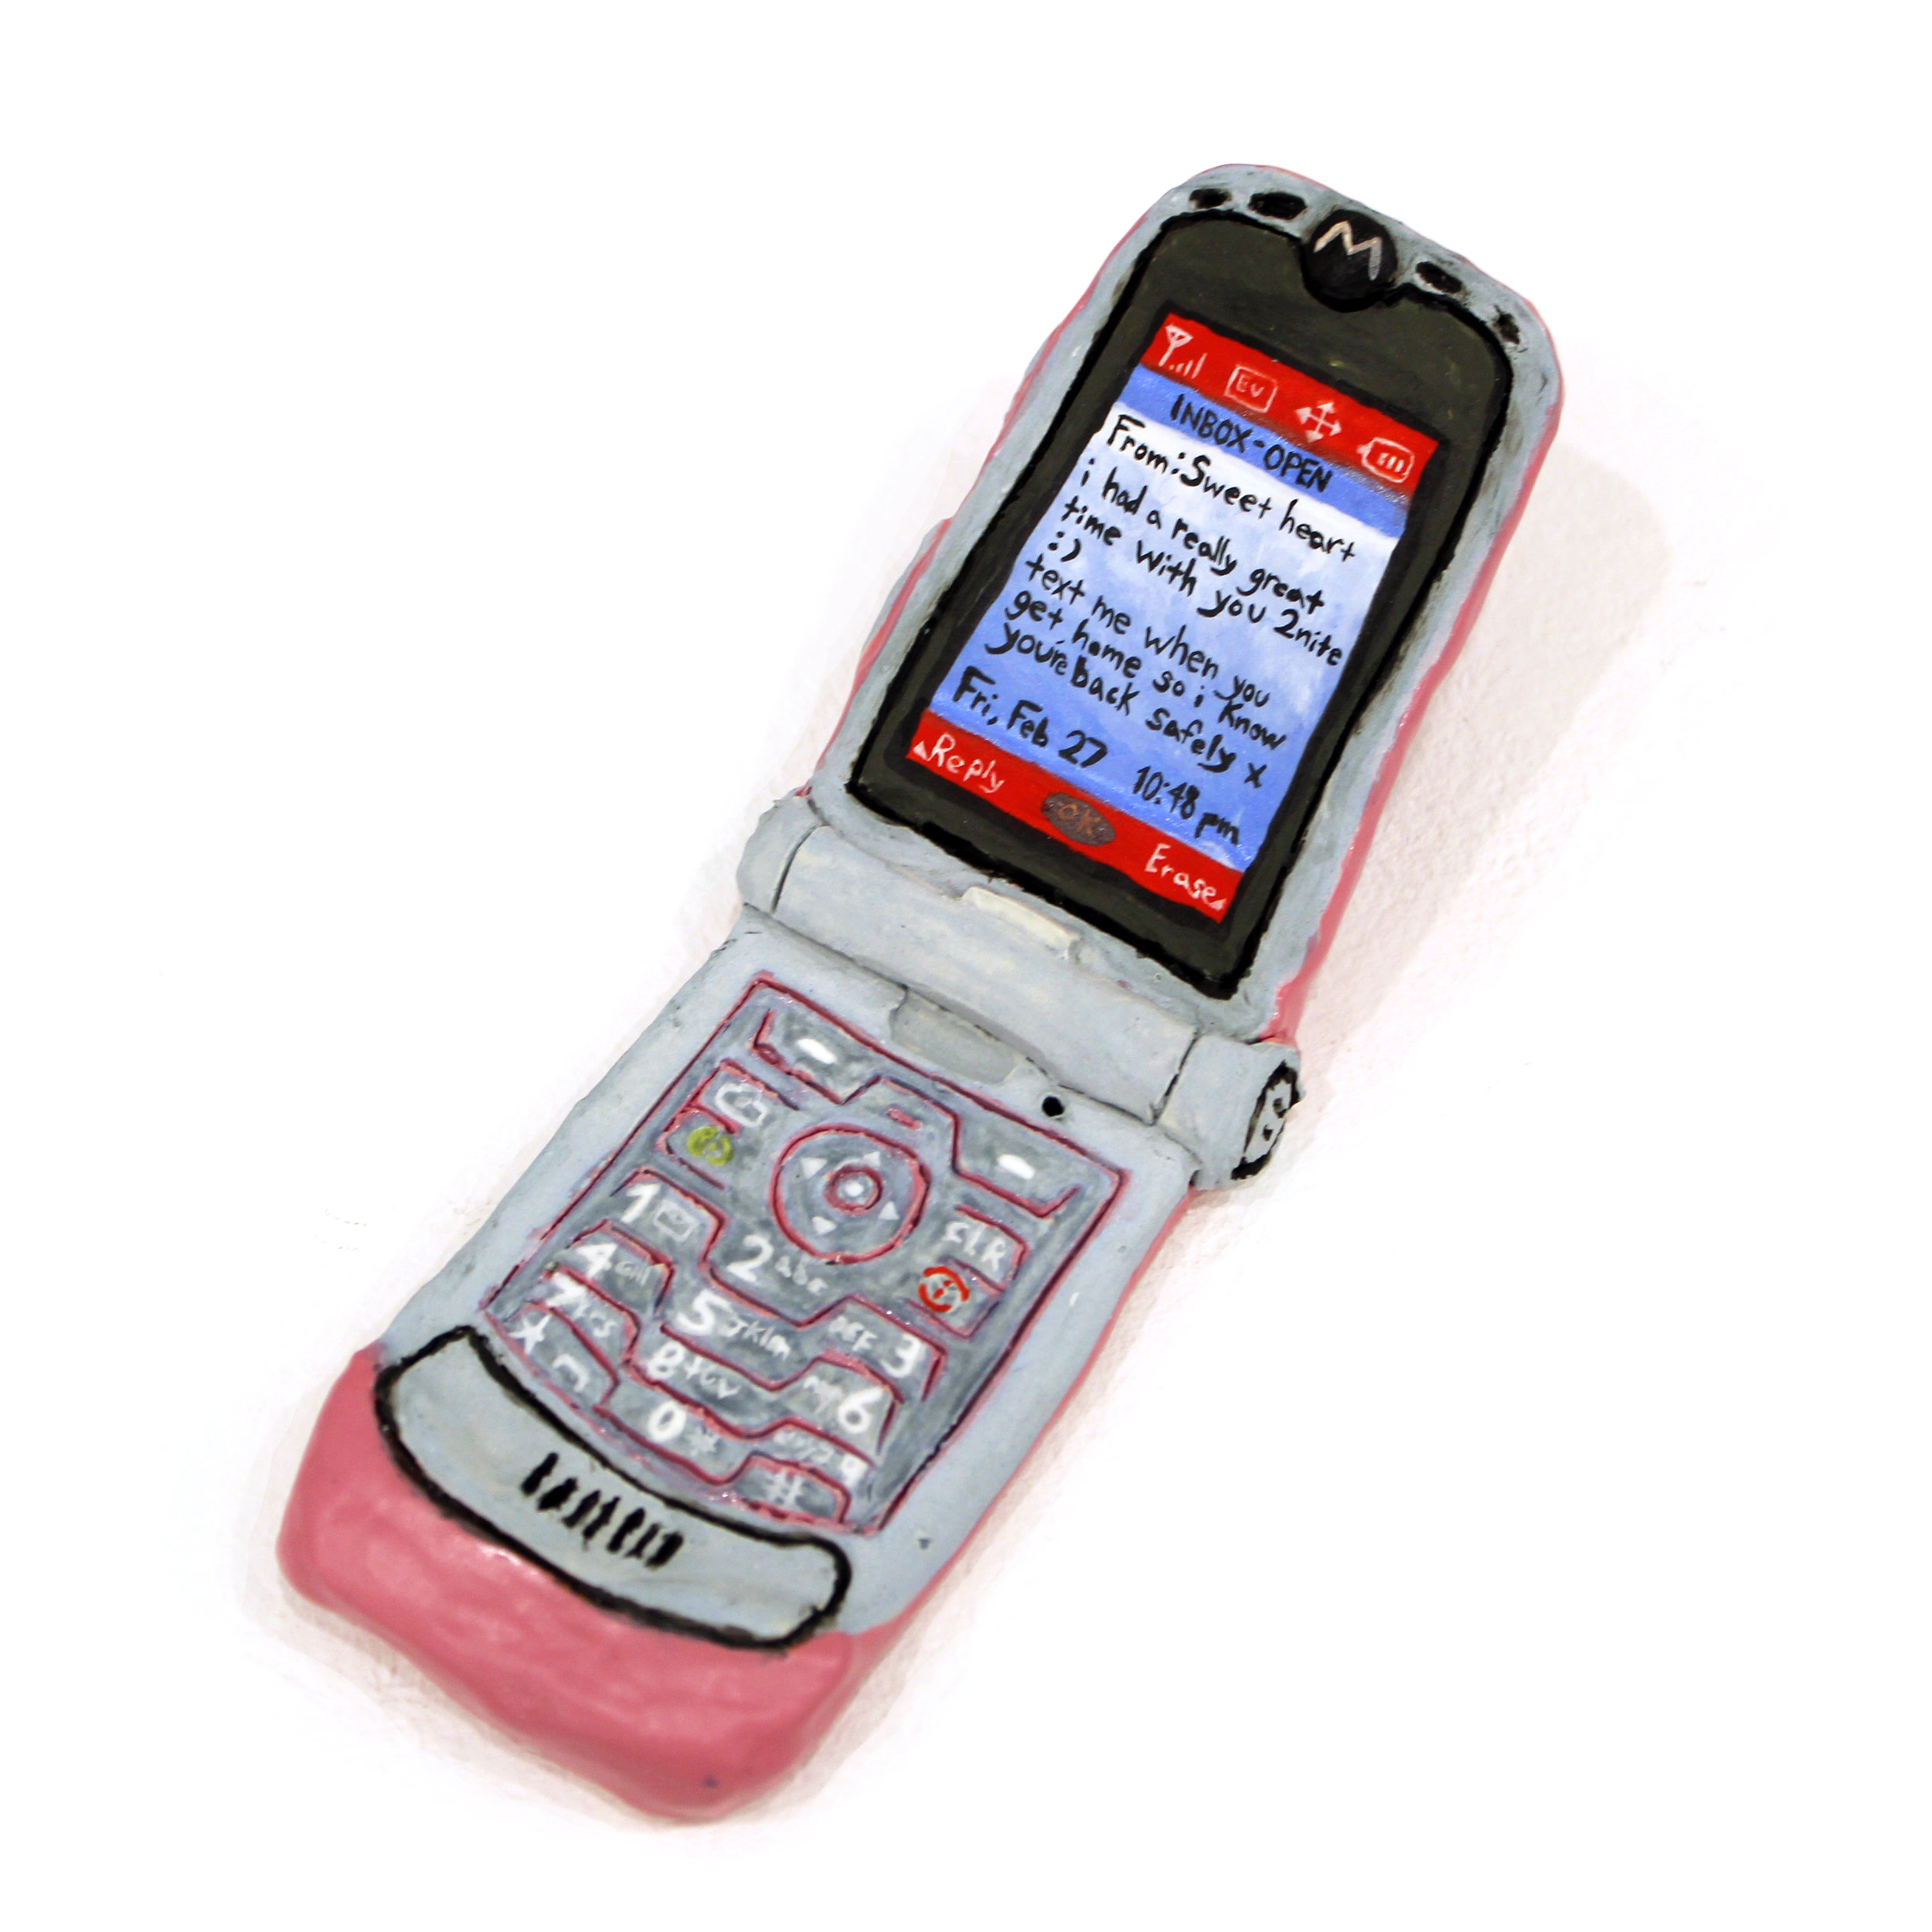 Text from Sweetheart on a 2004 Razor